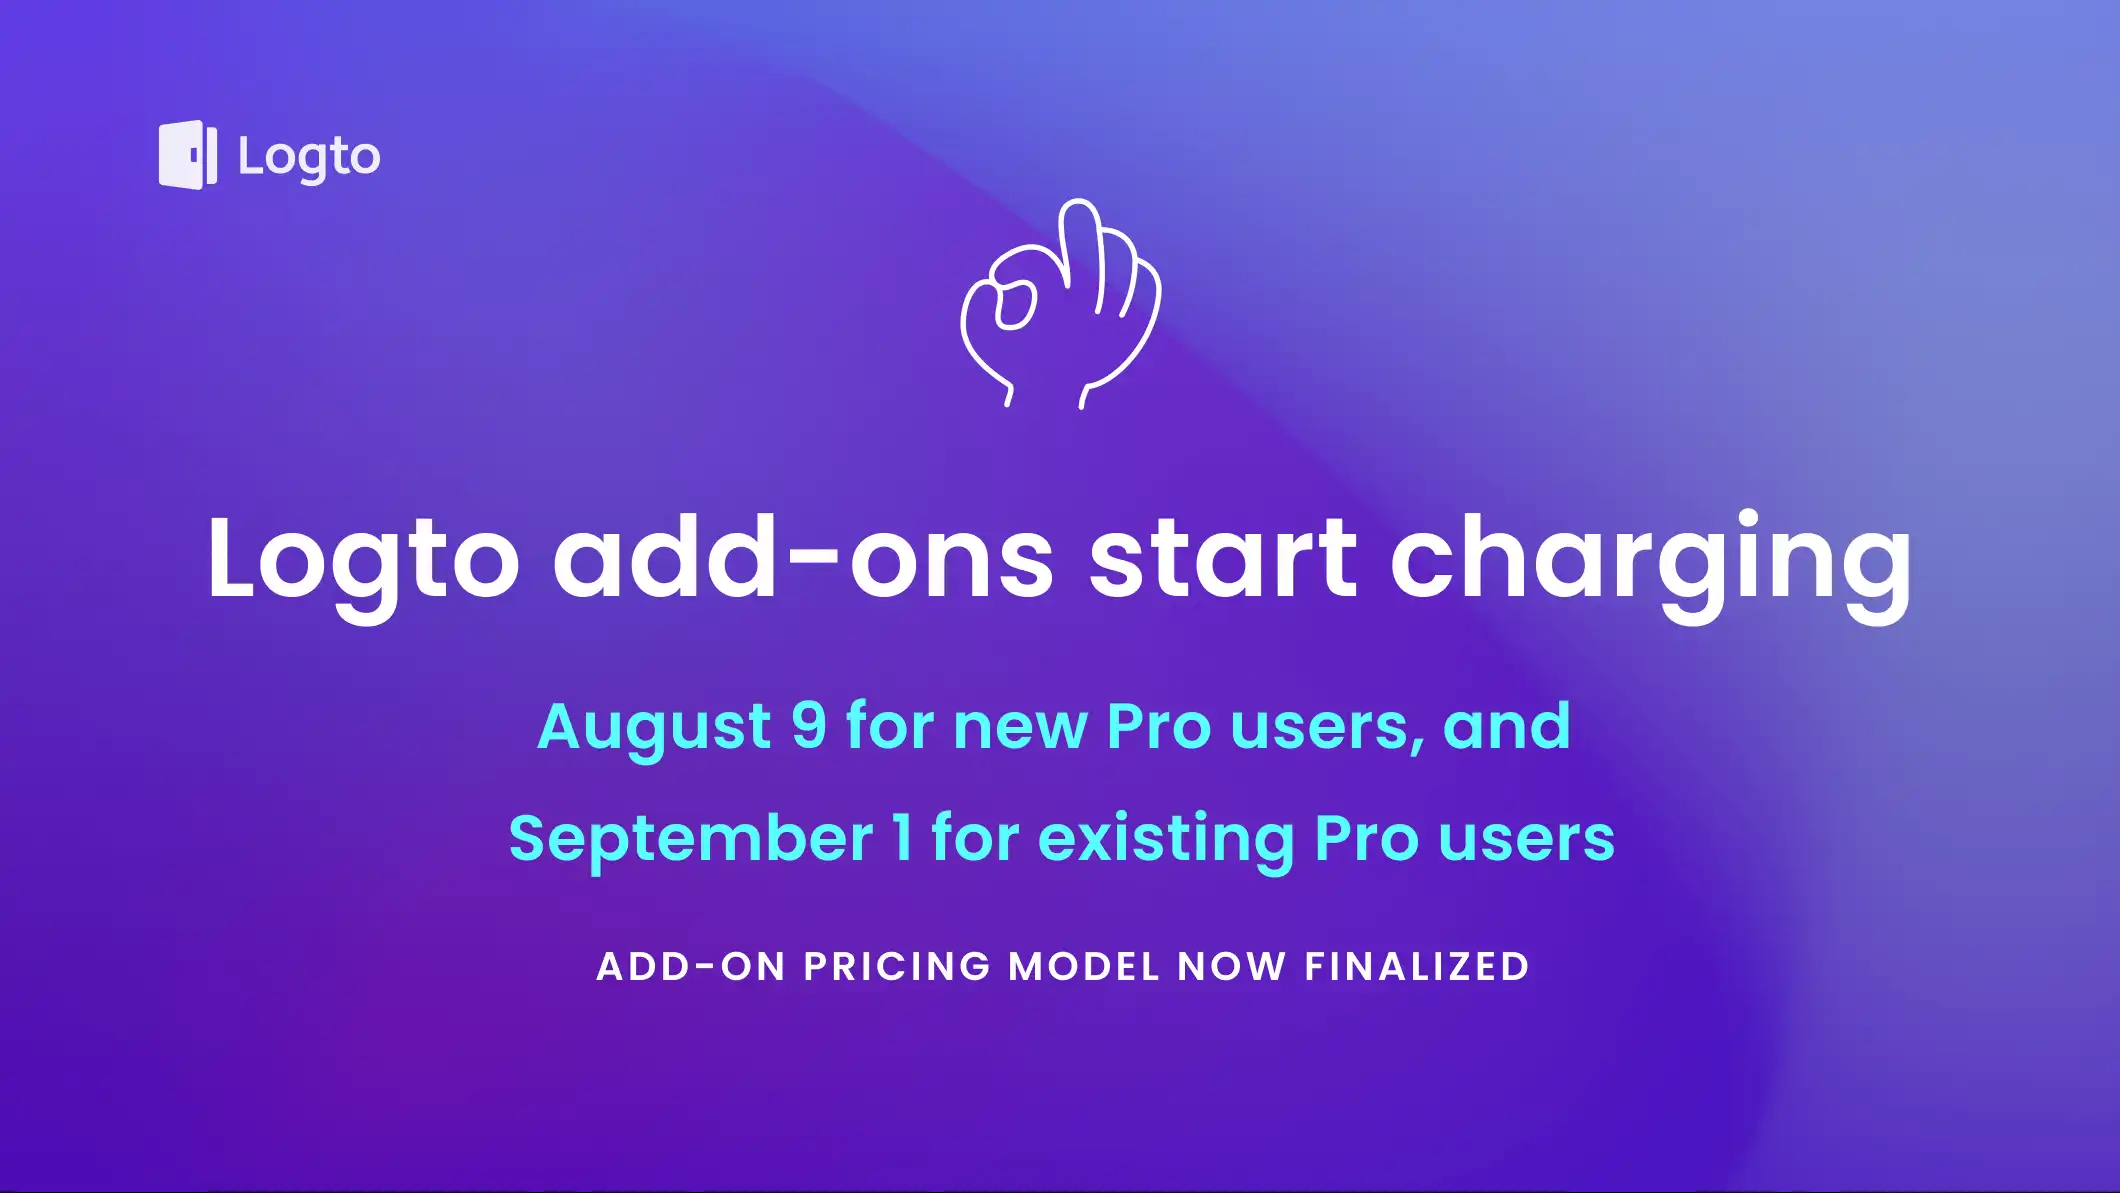 Update on Logto Cloud pricing: Add-ons start charging